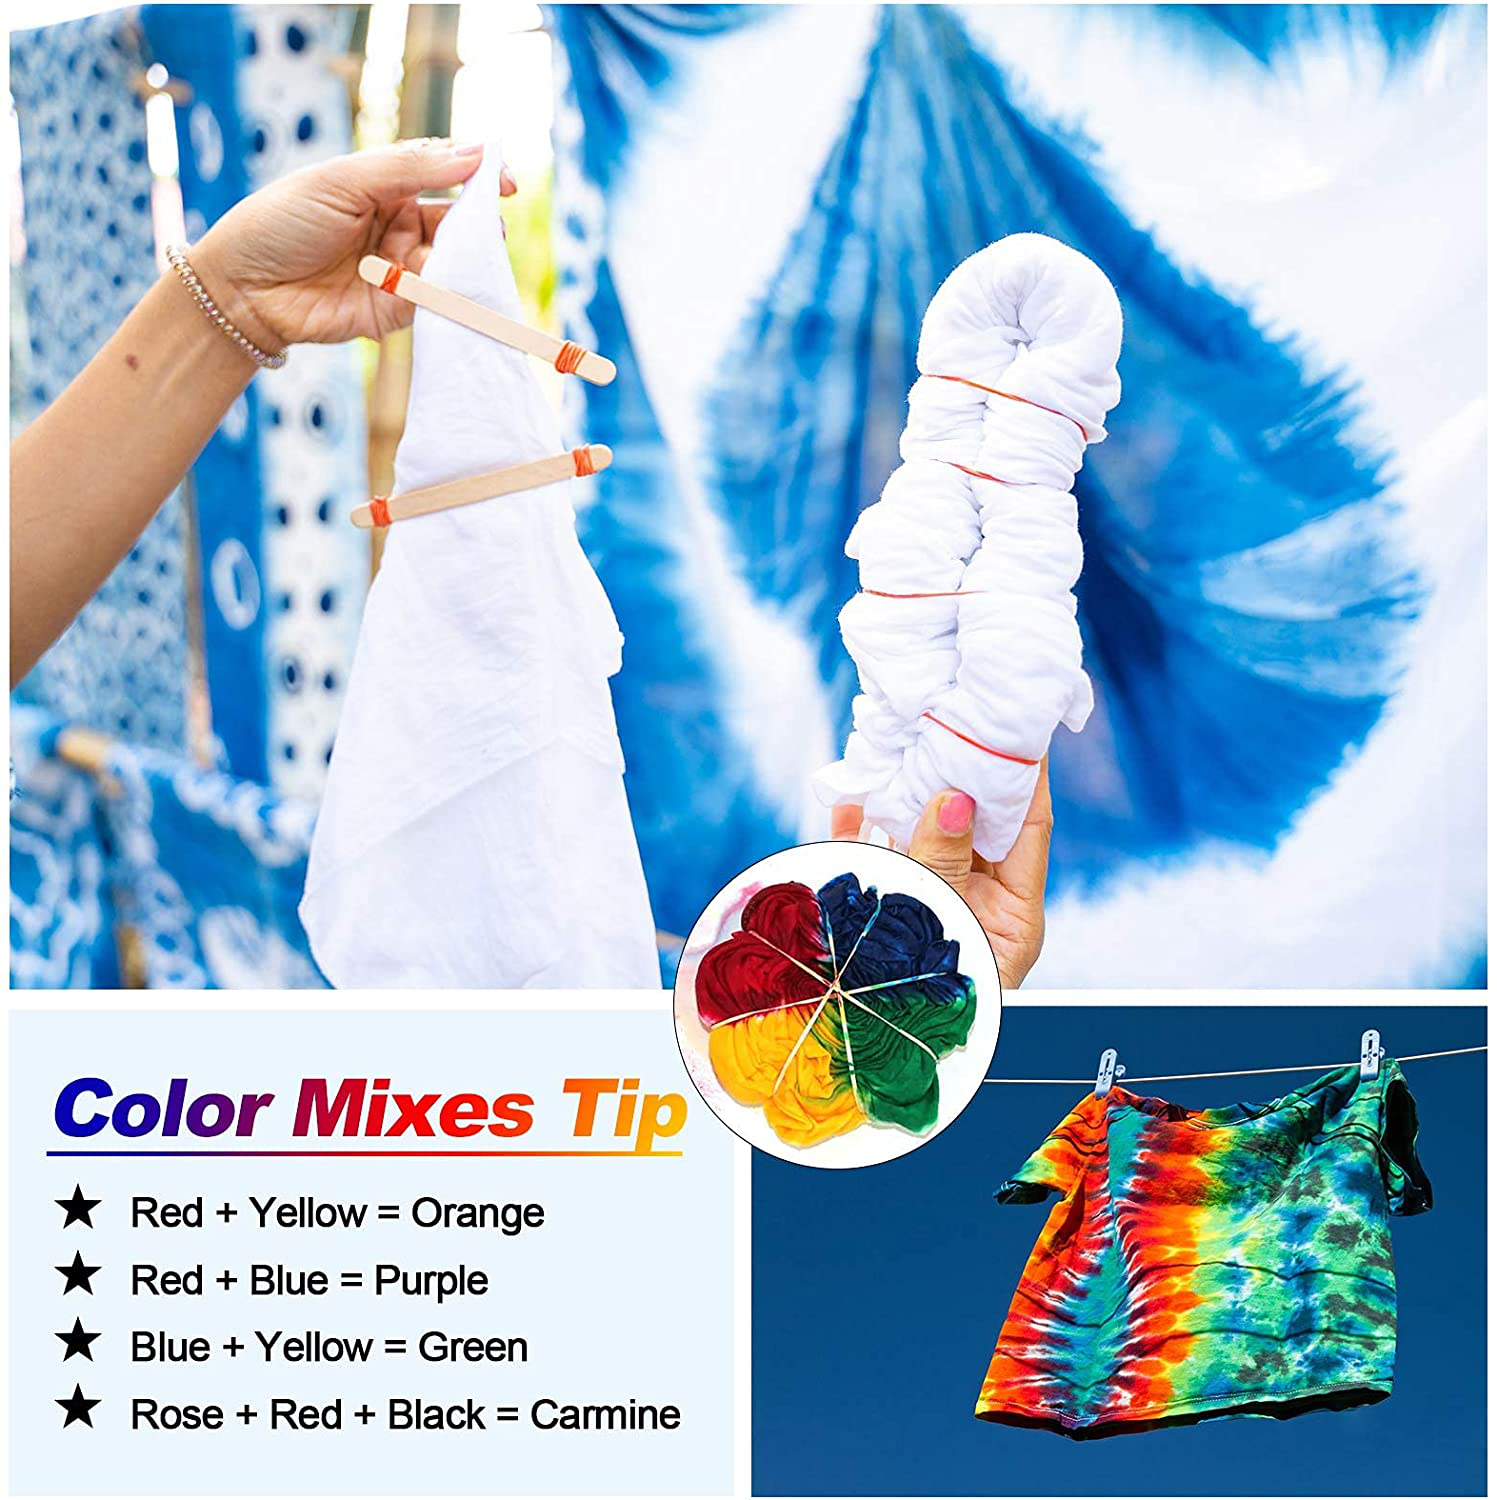 Large Tie Dye Kit for Kids and Adults - 239 Pack Permanent Tie Dye Kits for Clothing Craft Fabric Textile Party Group Handmade Project